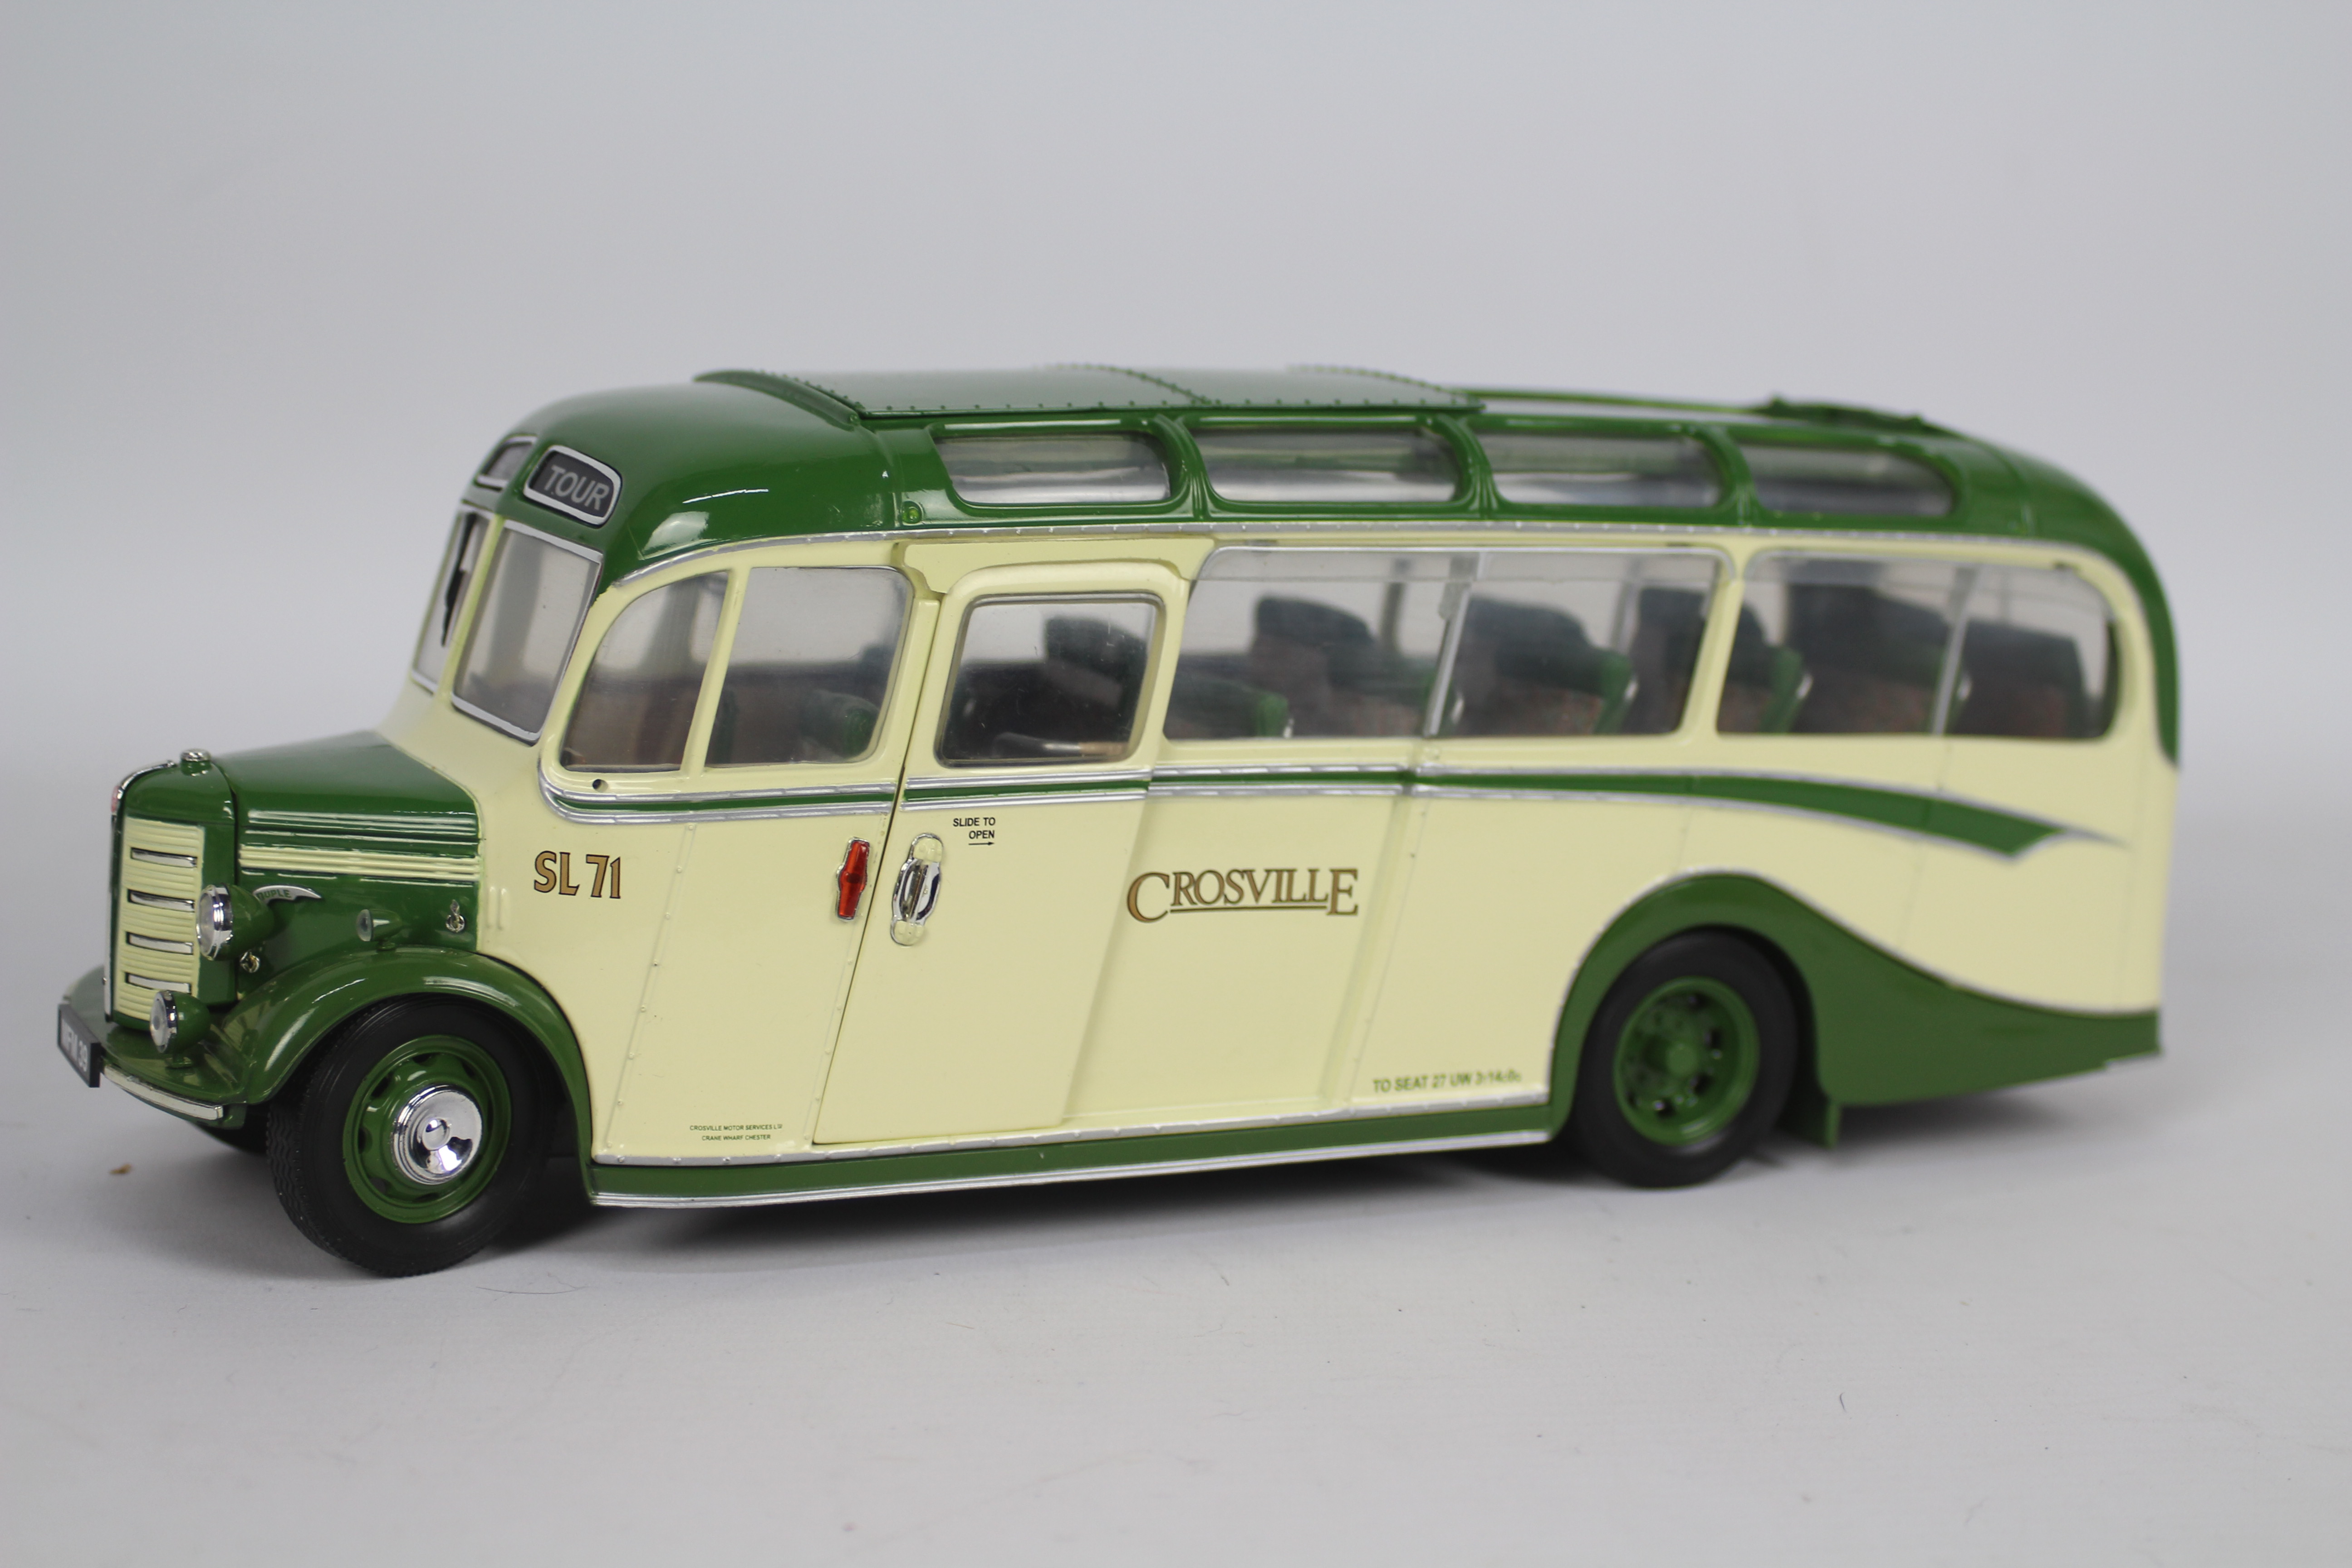 Original Classics - A boxed limited edition 1:24 Bedford OB Duple Coach in Crossville livery with - Image 2 of 9